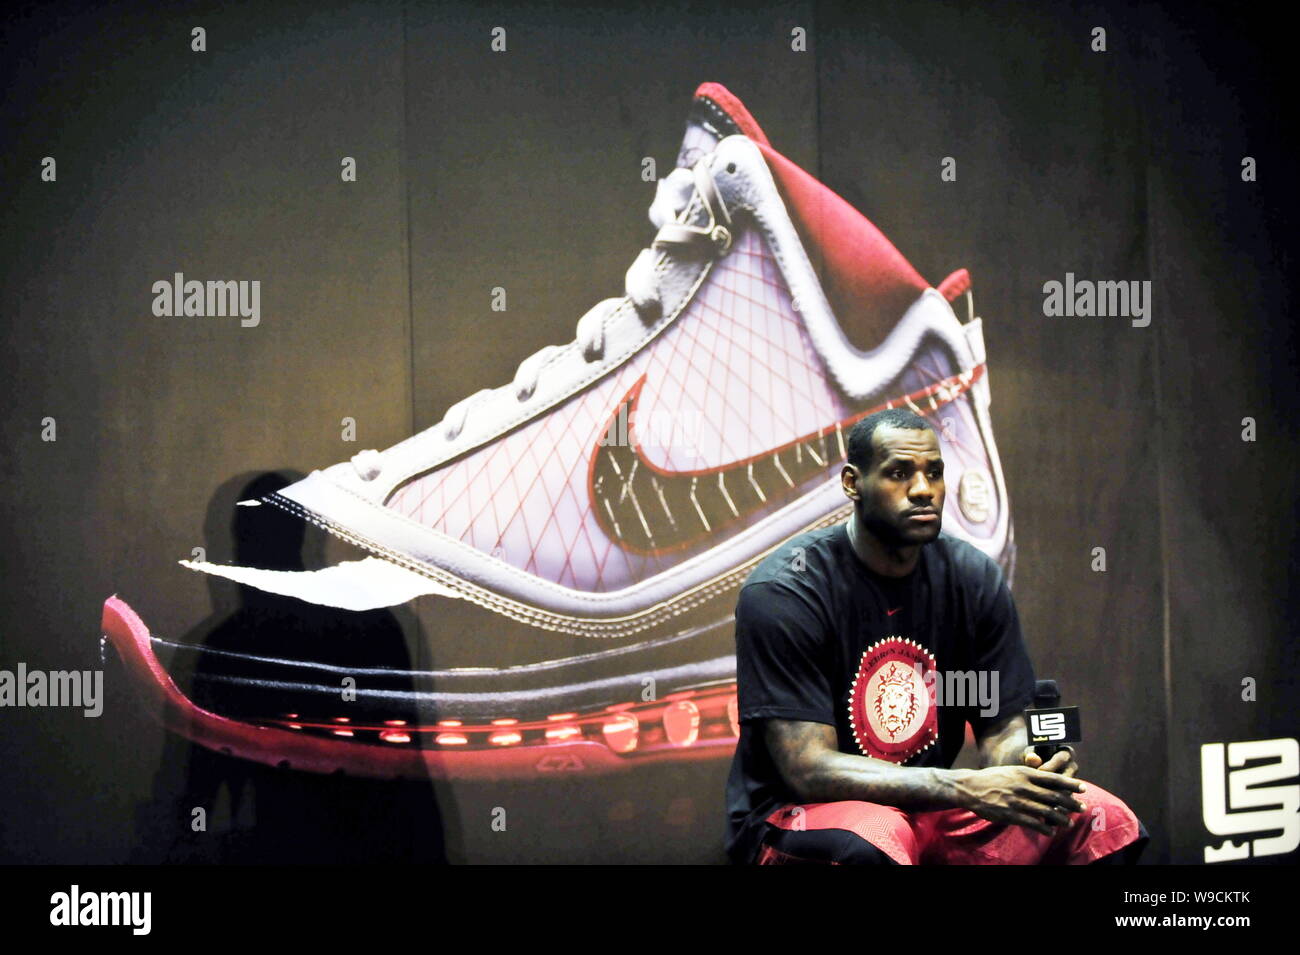 NBA player Lebron James of the Cleveland Cavaliers is seen during a campaign in Beijing, China, Monday, 24 August 2009. Stock Photo